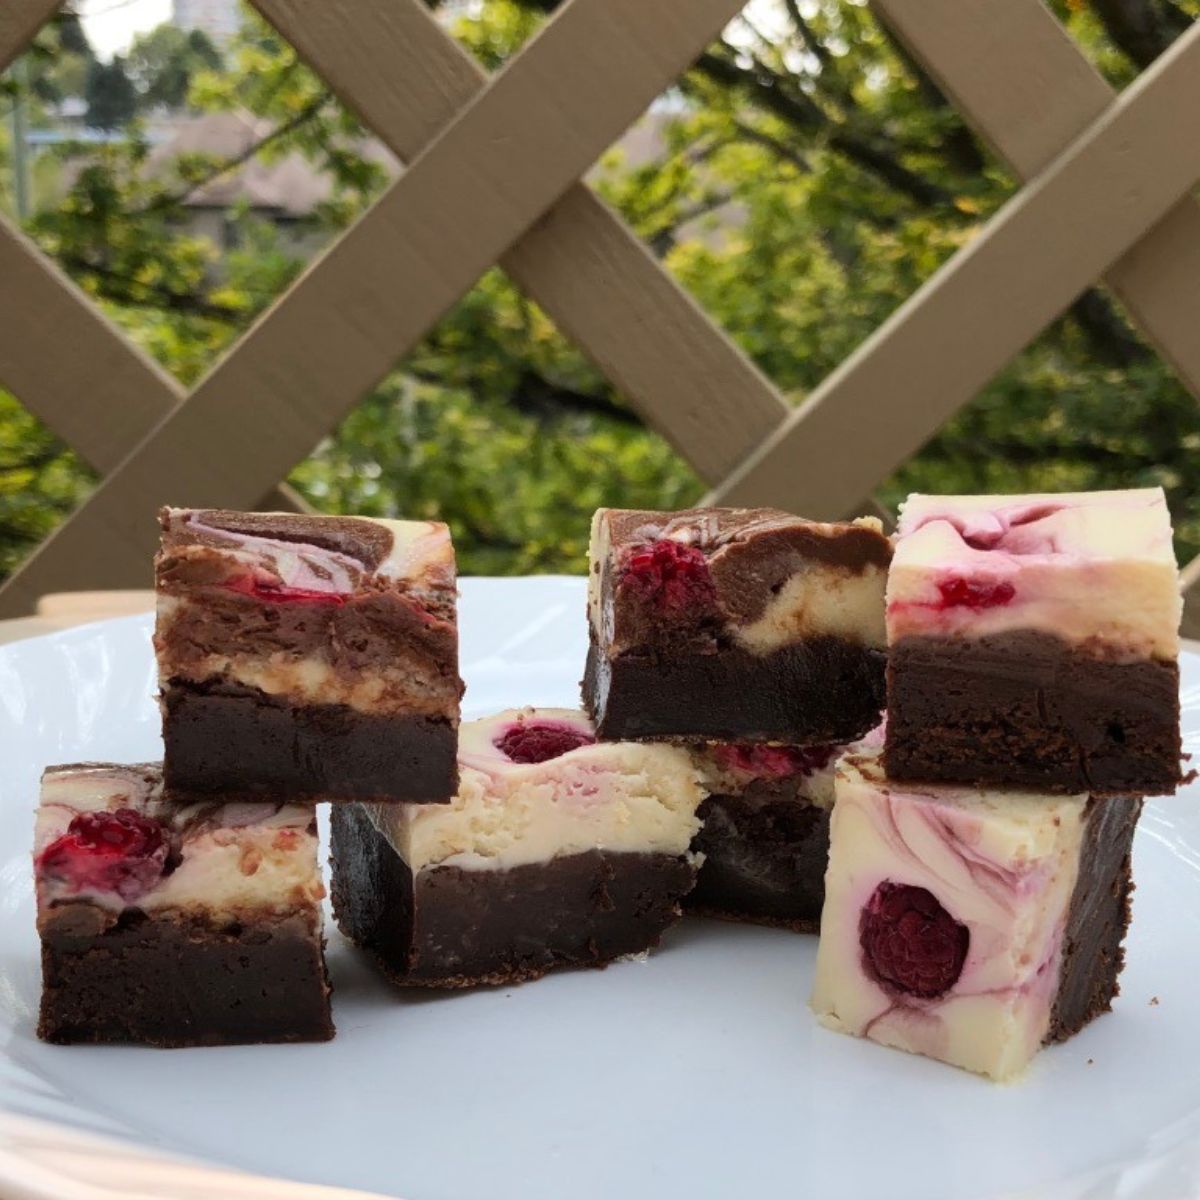 Raspberry Swirl Cheesecake Brownies cut on a plate and ready to eat.